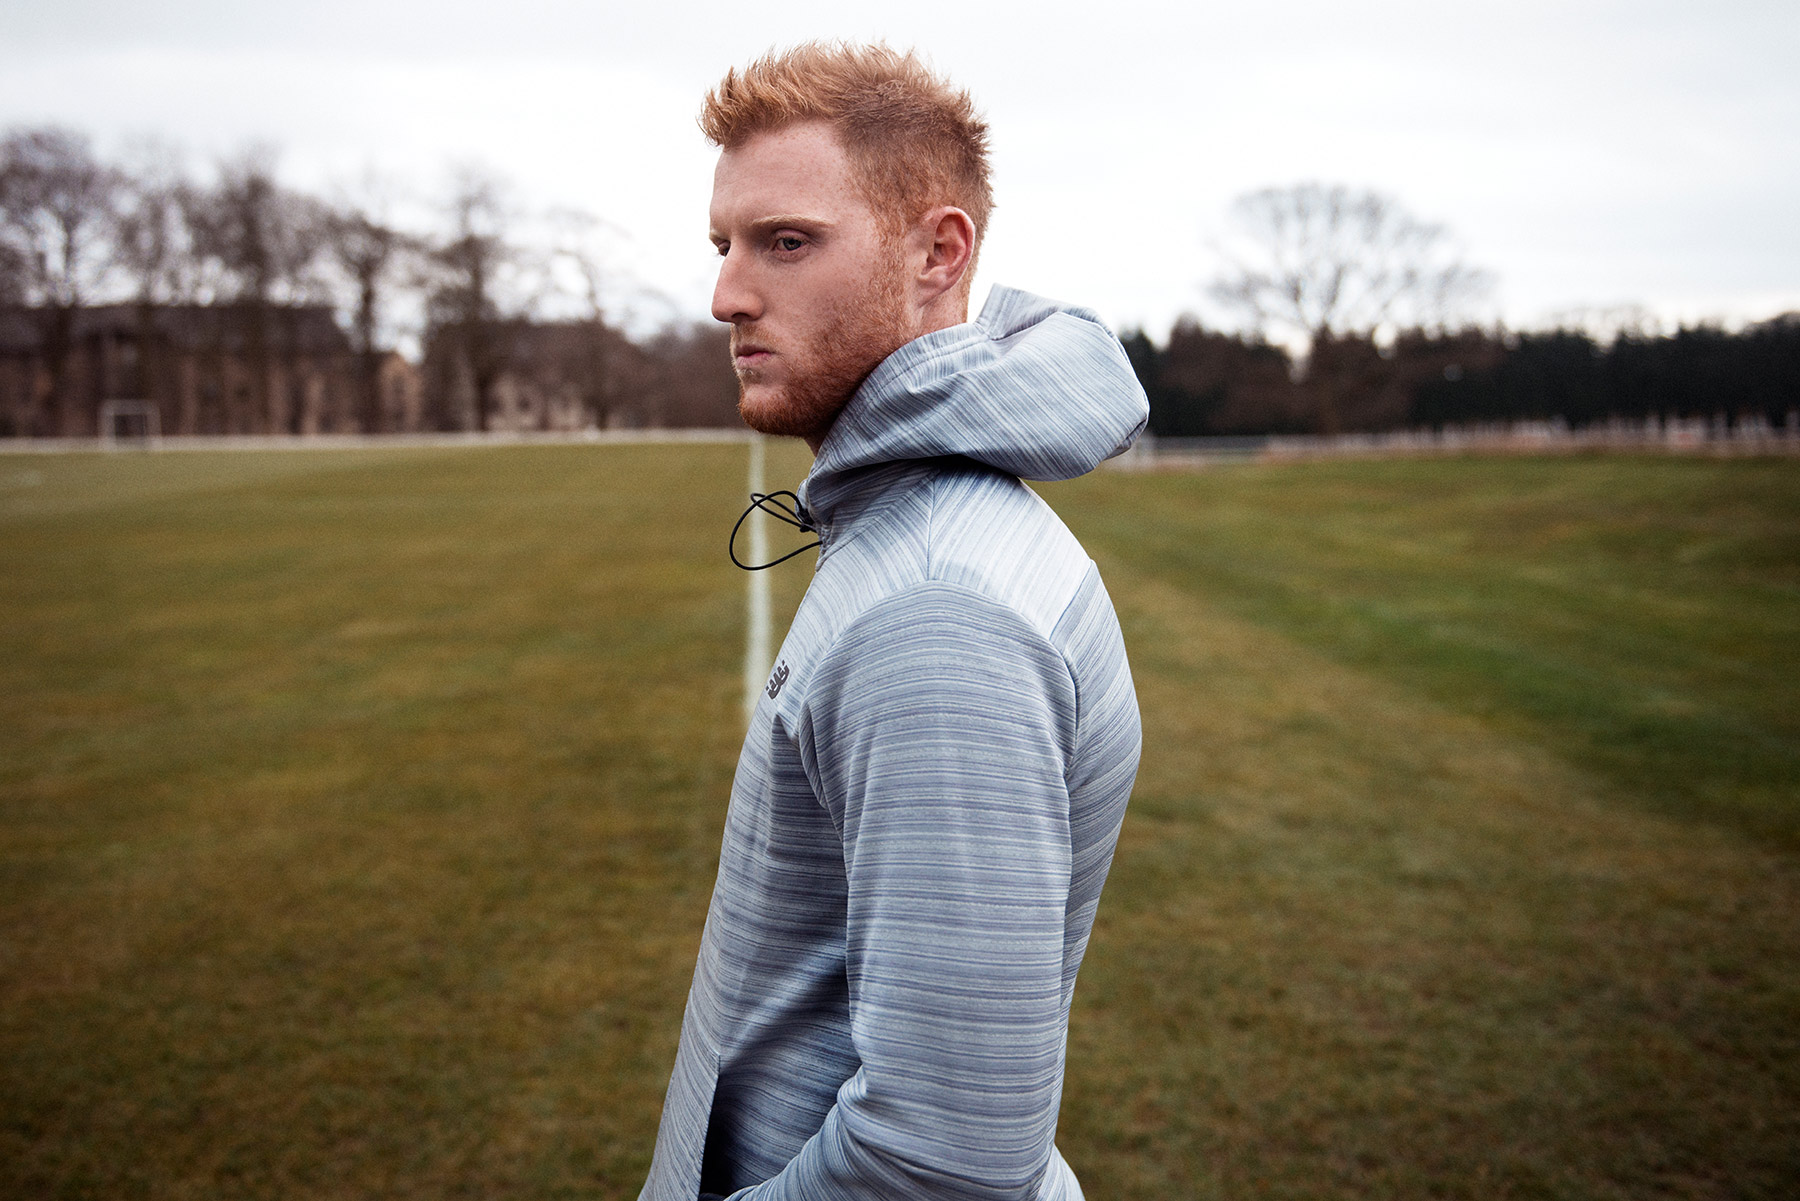 Good Boy Wolf Photographer, filmic portrait, ben stokes cricketer standing in a field wearing grey top 